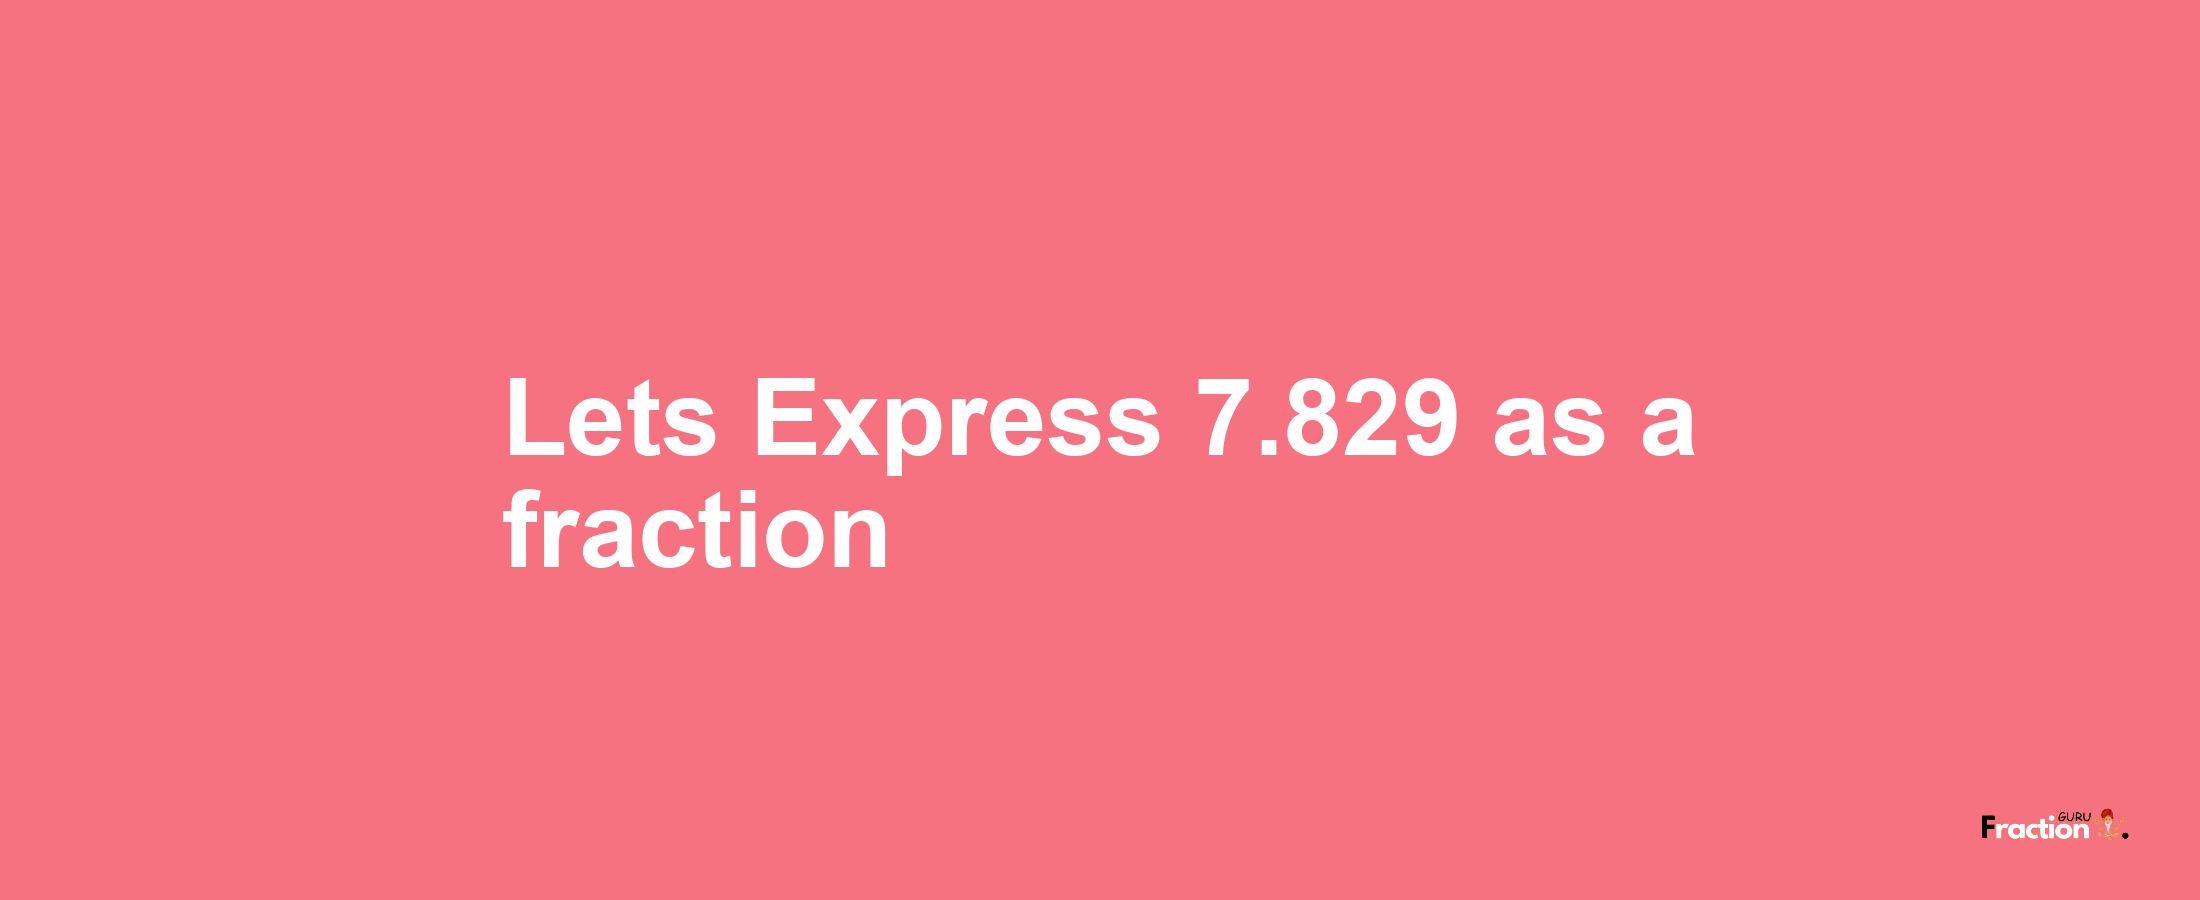 Lets Express 7.829 as afraction